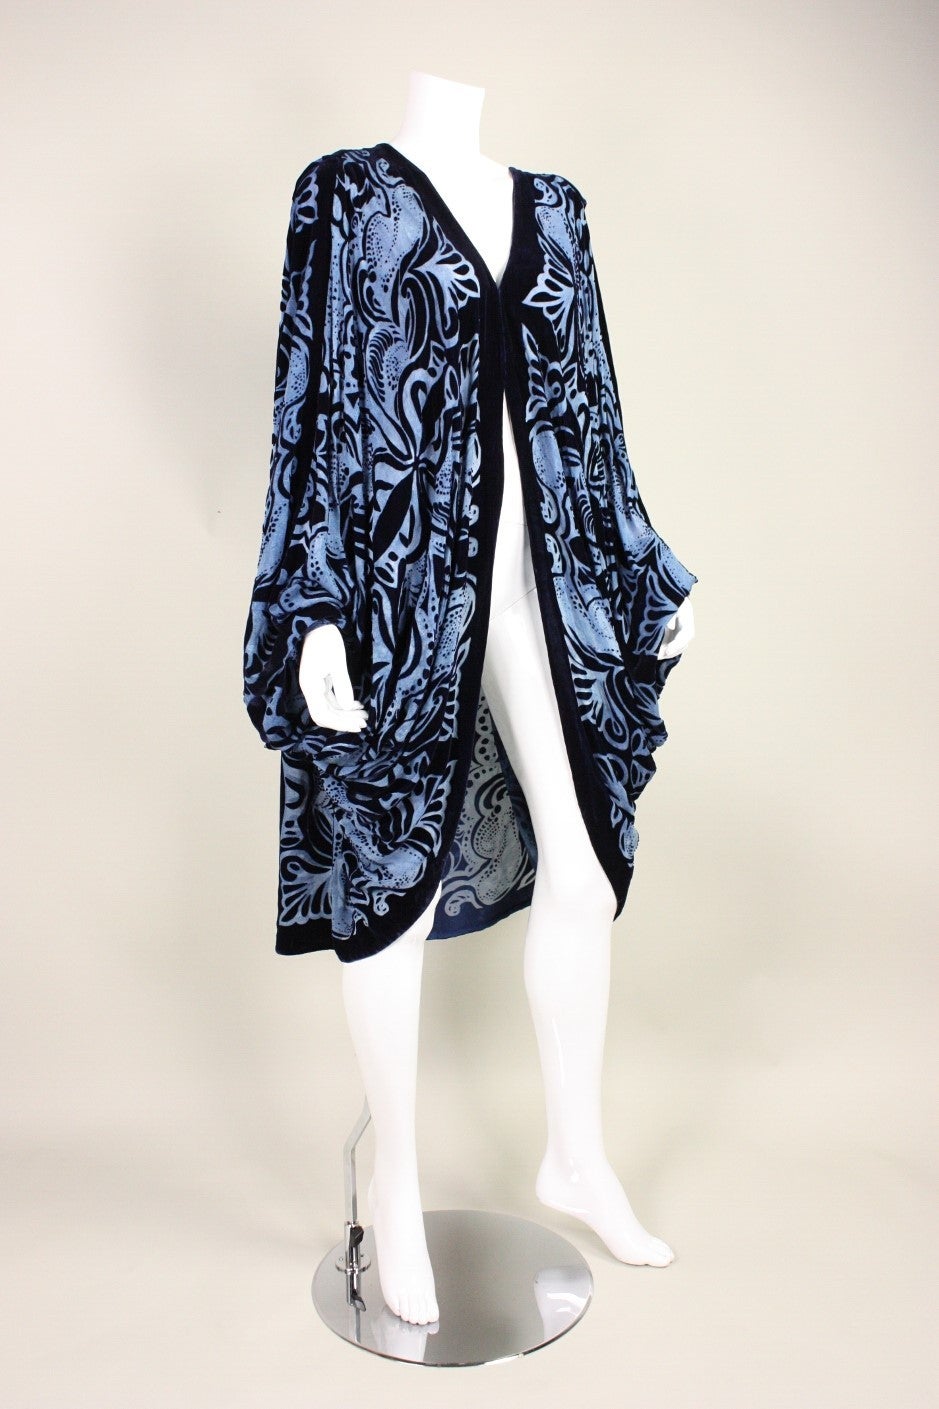 Vintage cocoon coat from Charles & Patricia Lester is made of navy velvet devore (burnout) in a scrolling pattern.  V-neck.  Two hook and eye closures at the center front bust may have been added later.  Snaps at wrists.  Unlined.

No size label. 